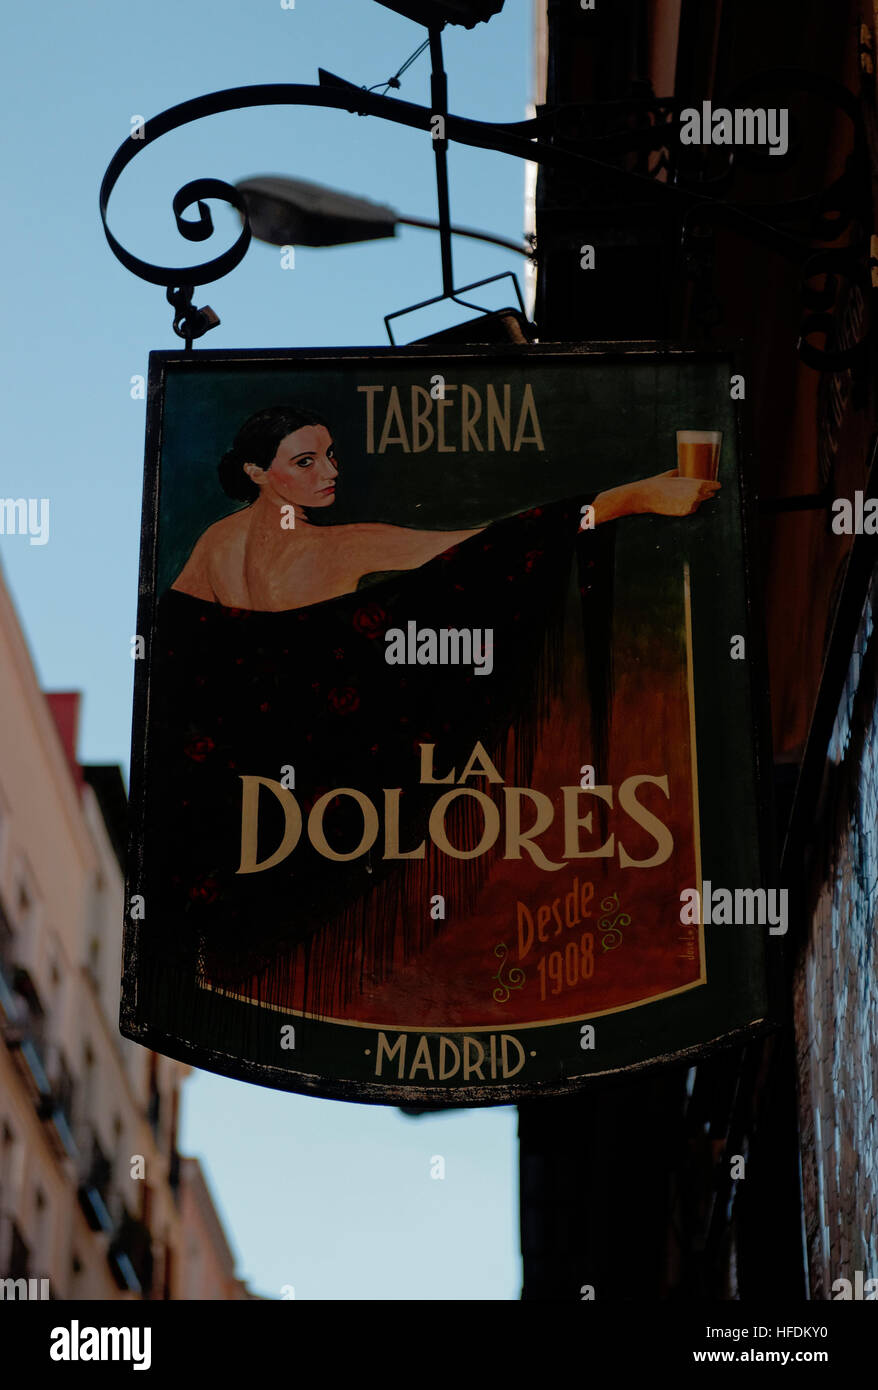 Hanging bar sign for La Dolores Taberna in Madrid Spain Stock Photo